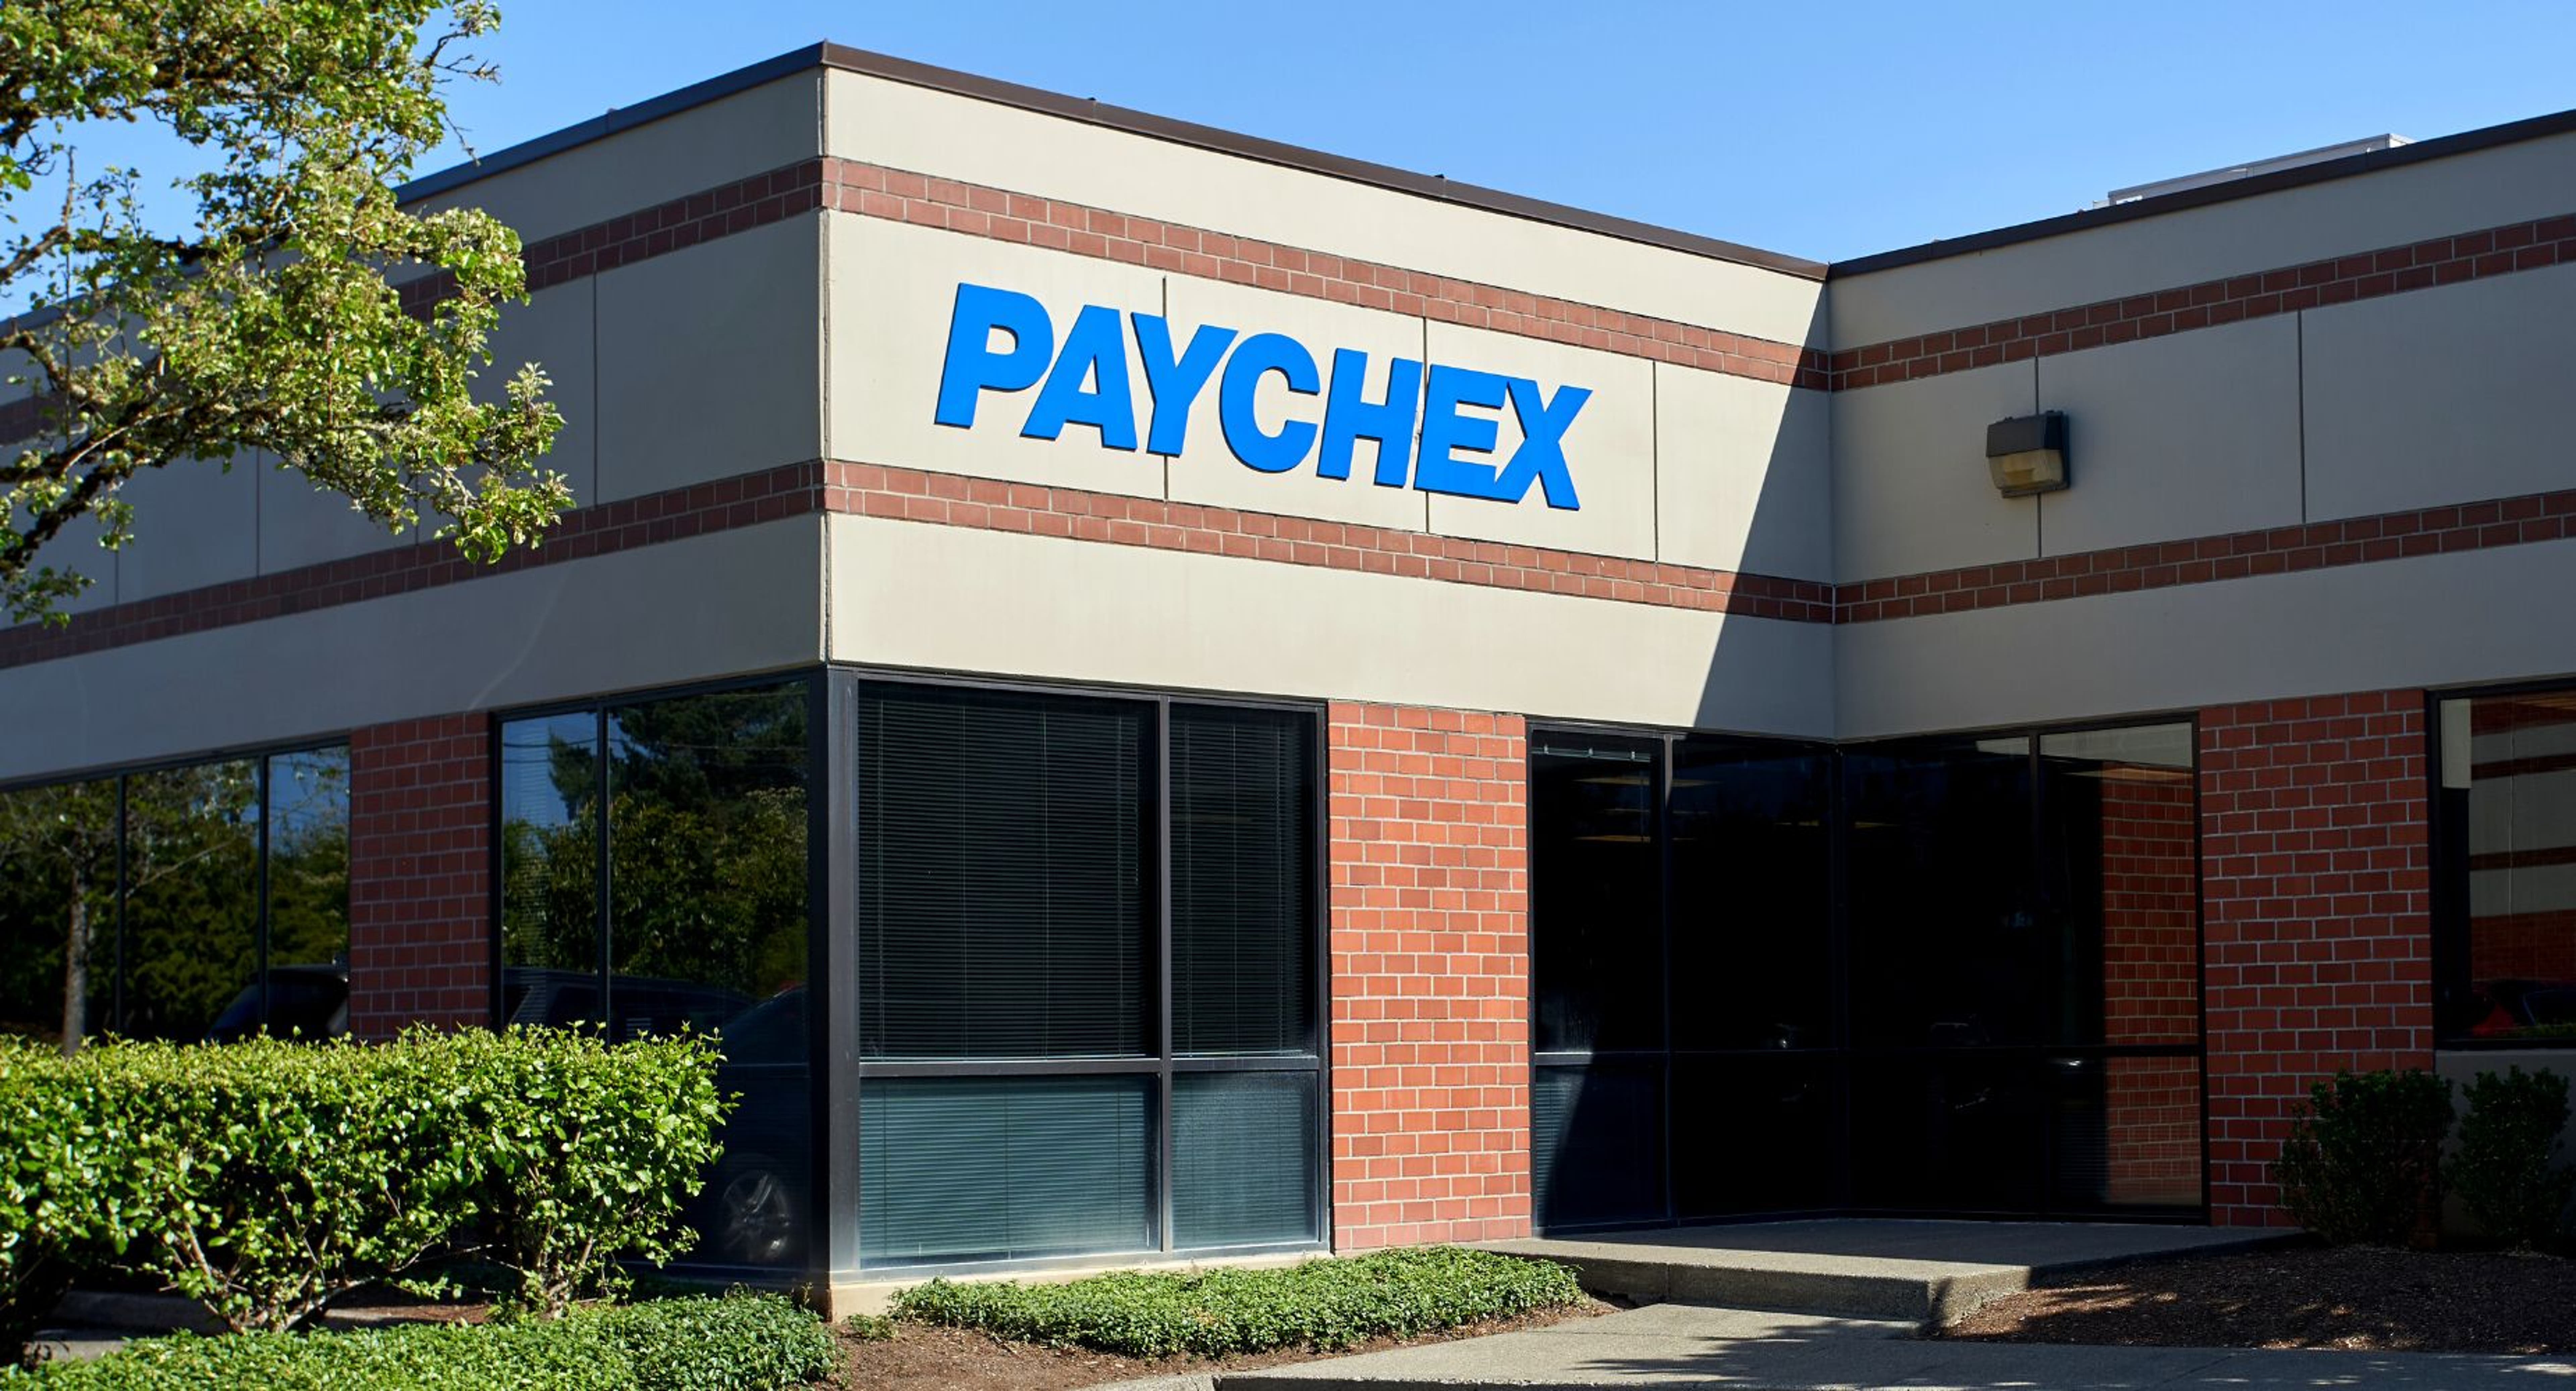 How To Earn $500 A Month From Paychex Following Upbeat Earnings